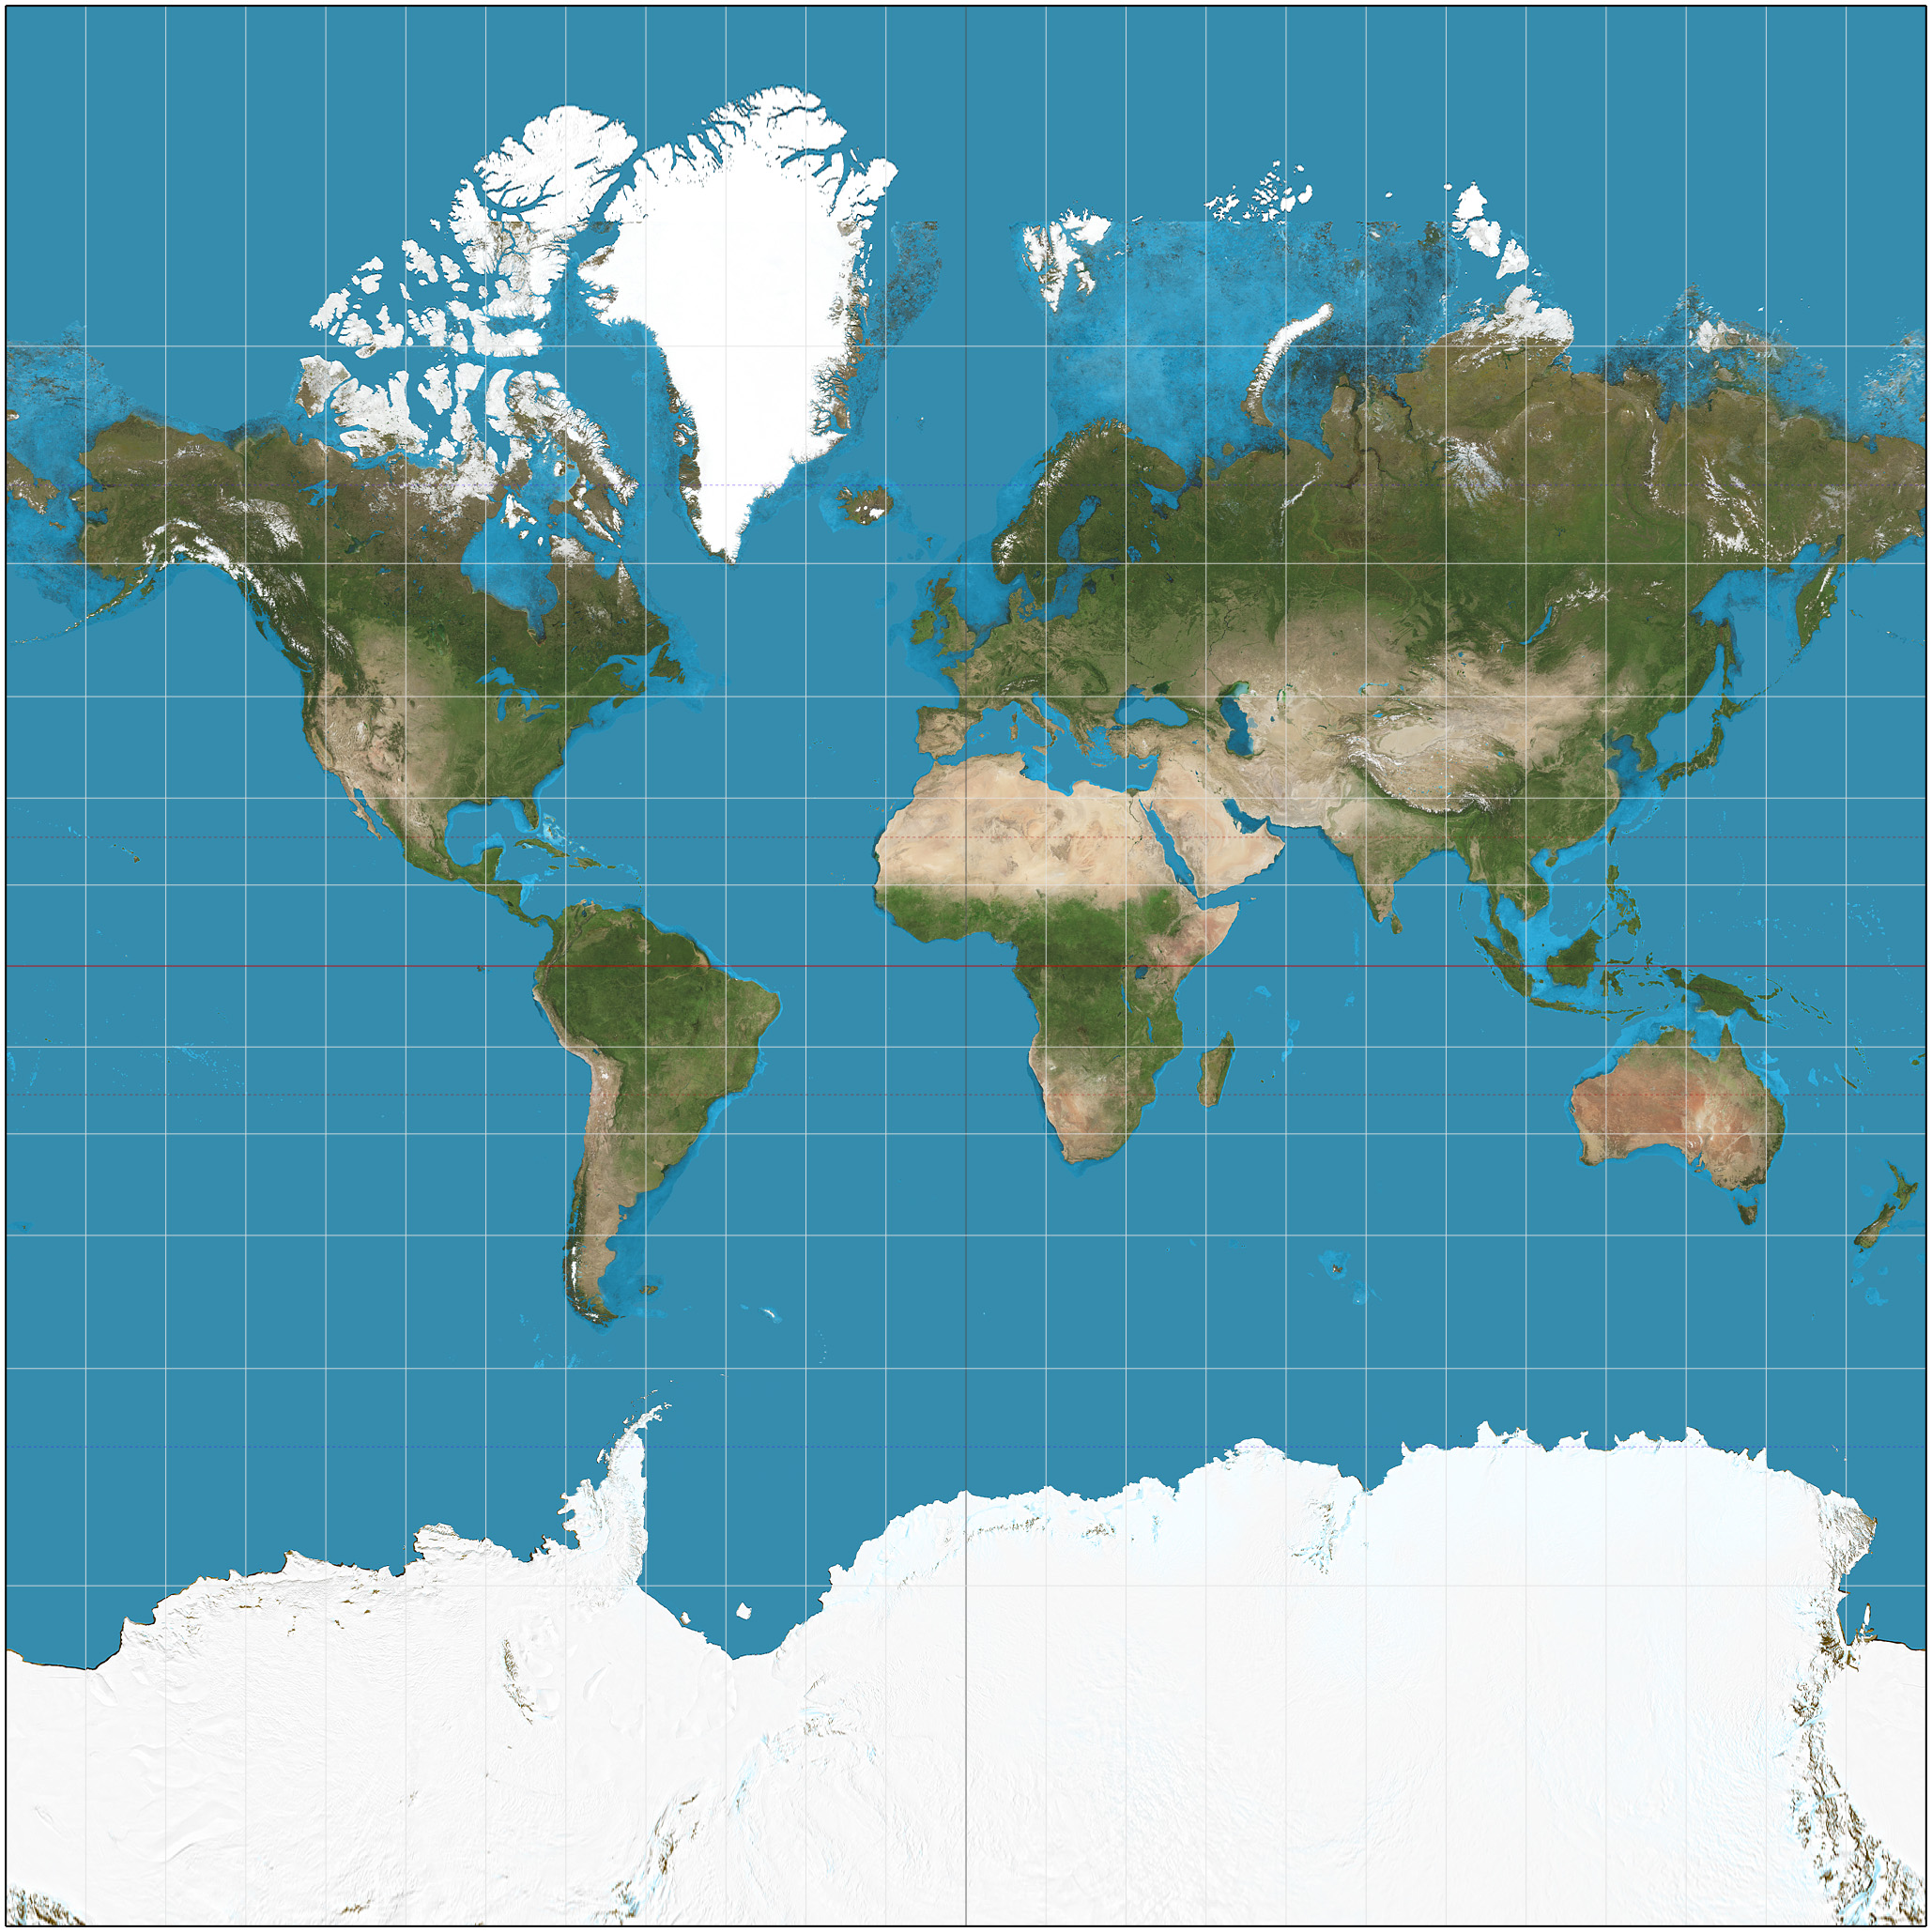 <p>a map projection of the earth onto a cylinder; areas appear greater the farther they are from the equator</p>